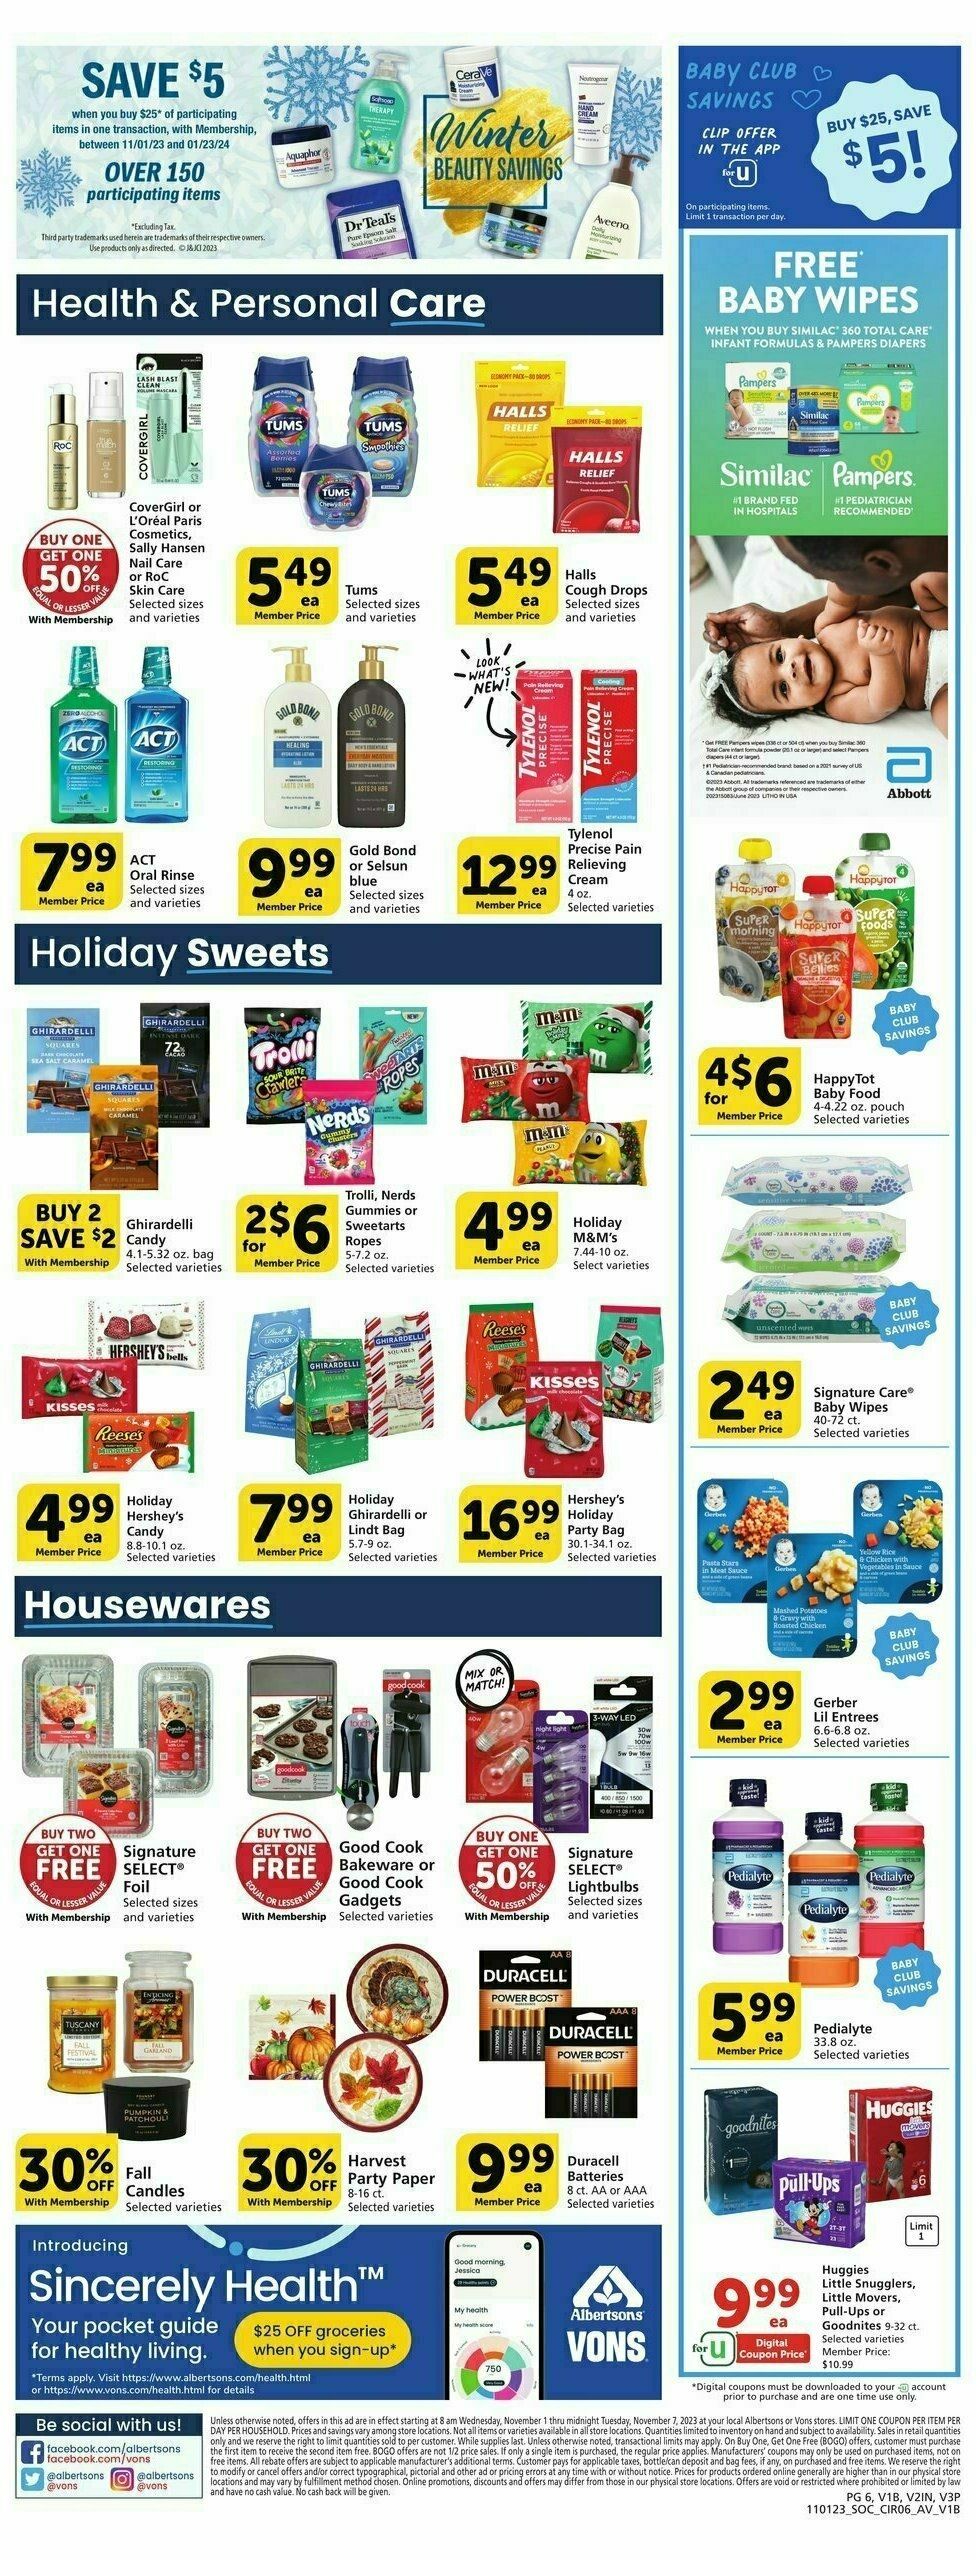 Vons Weekly Ad from November 1